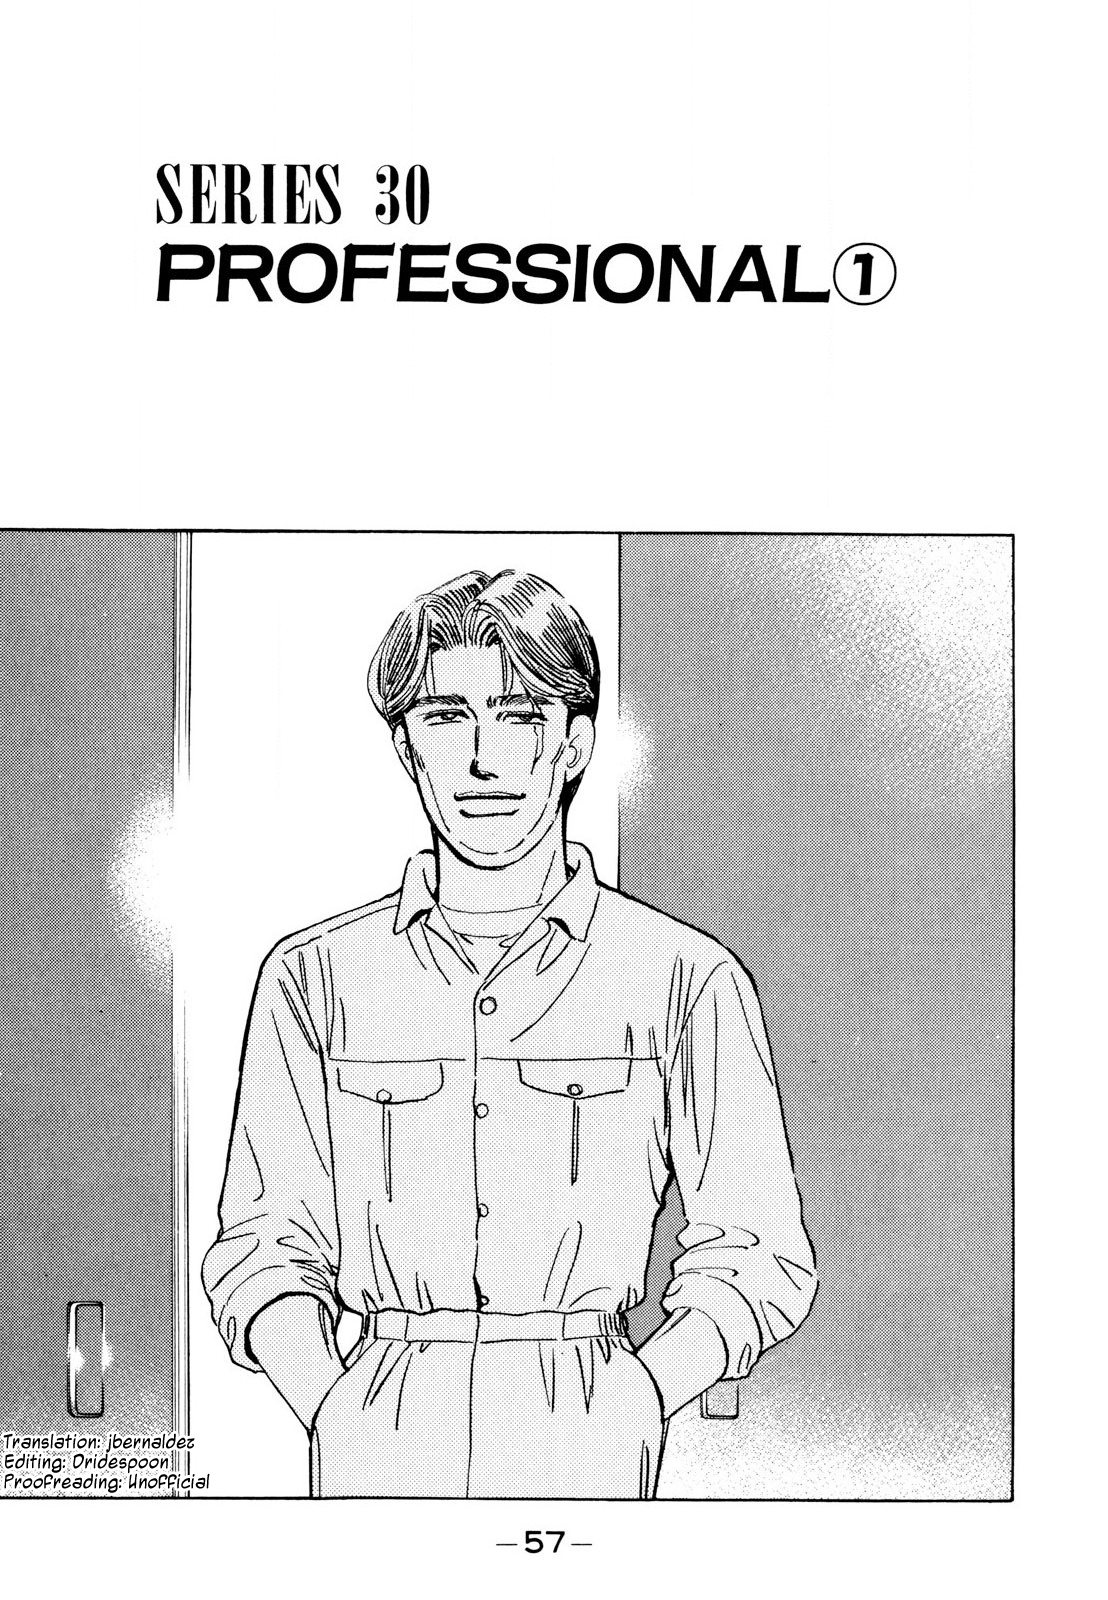 Wangan Midnight Vol.10 Chapter 108: Professional ① - Picture 1